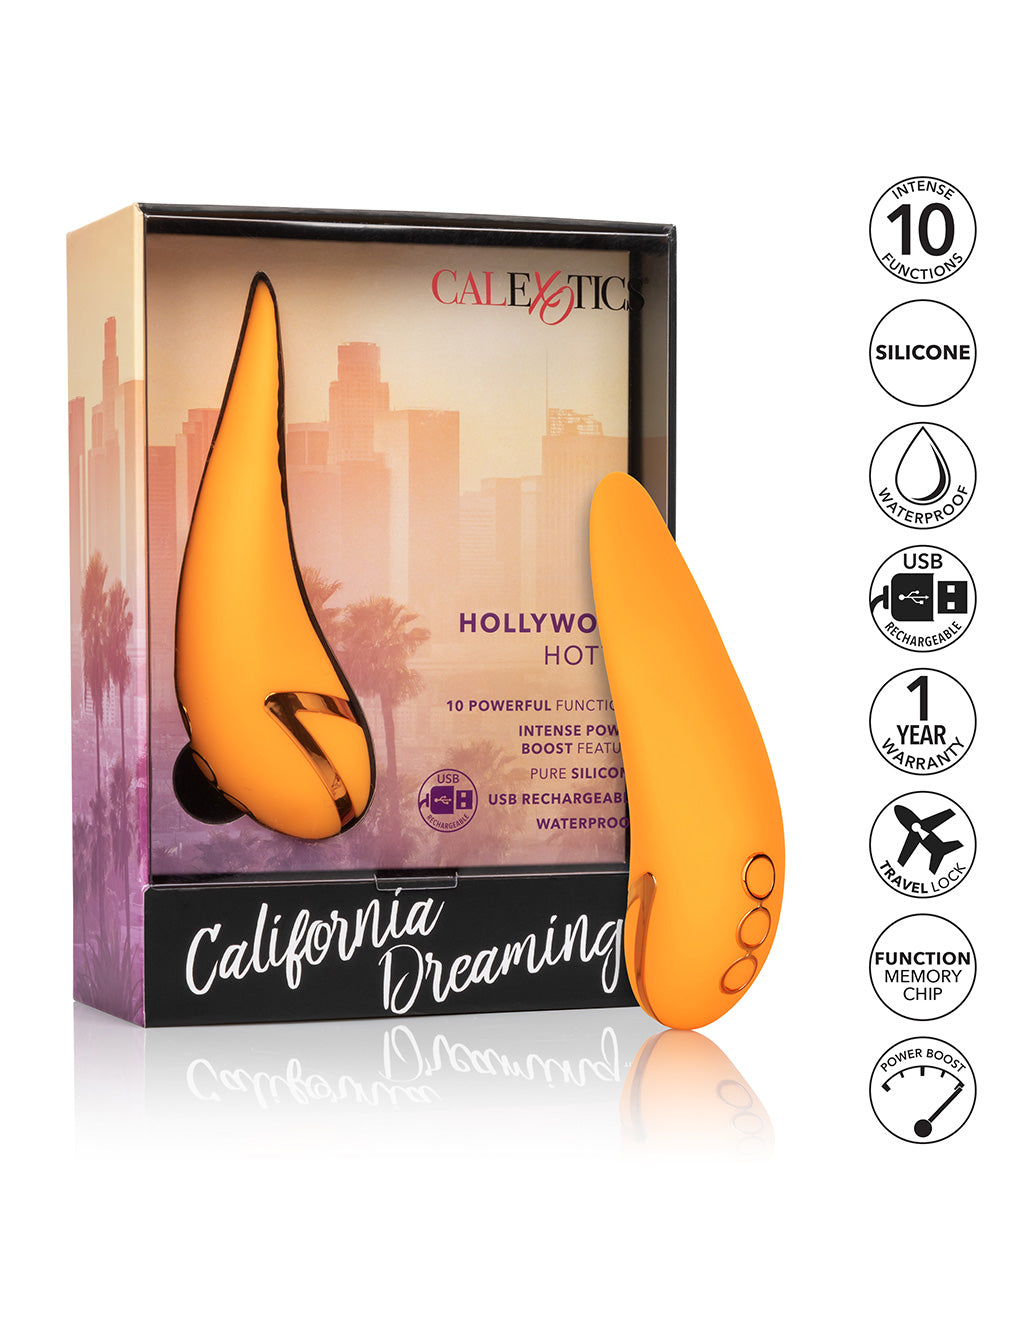 Cal Dreaming Hollywood Hottie By California Exotics Box And Info